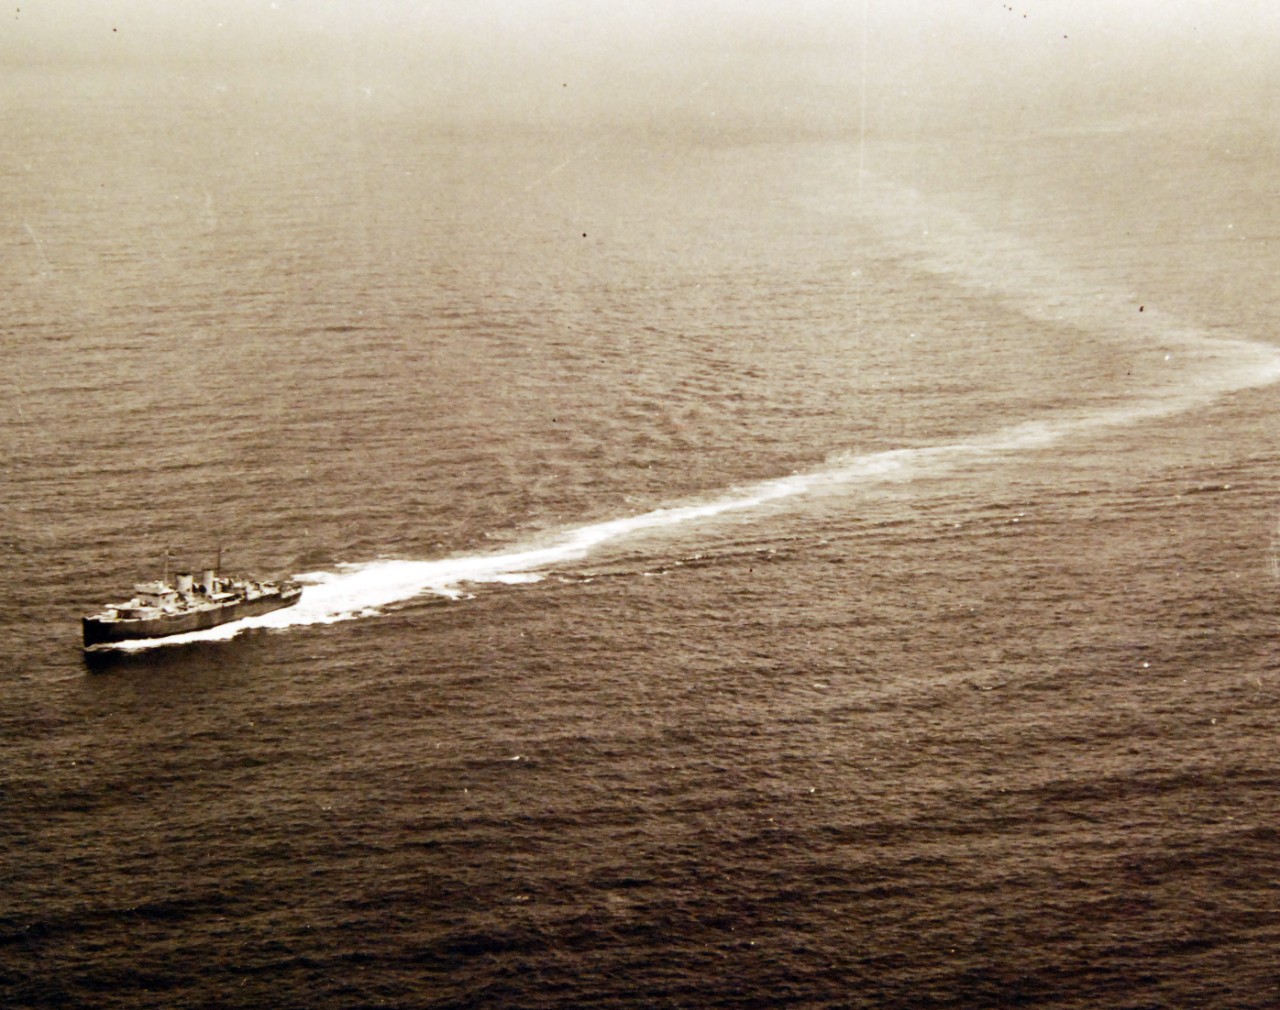 <p>80-G-61537: German U-boat attacks, WWII. HMCS Prince Henry (F-70) proceeding to the rescue of survivors of SS Delvalle, sunk by a German submarine off the southern coast of Haiti, April 12, 1942.&nbsp;</p>
